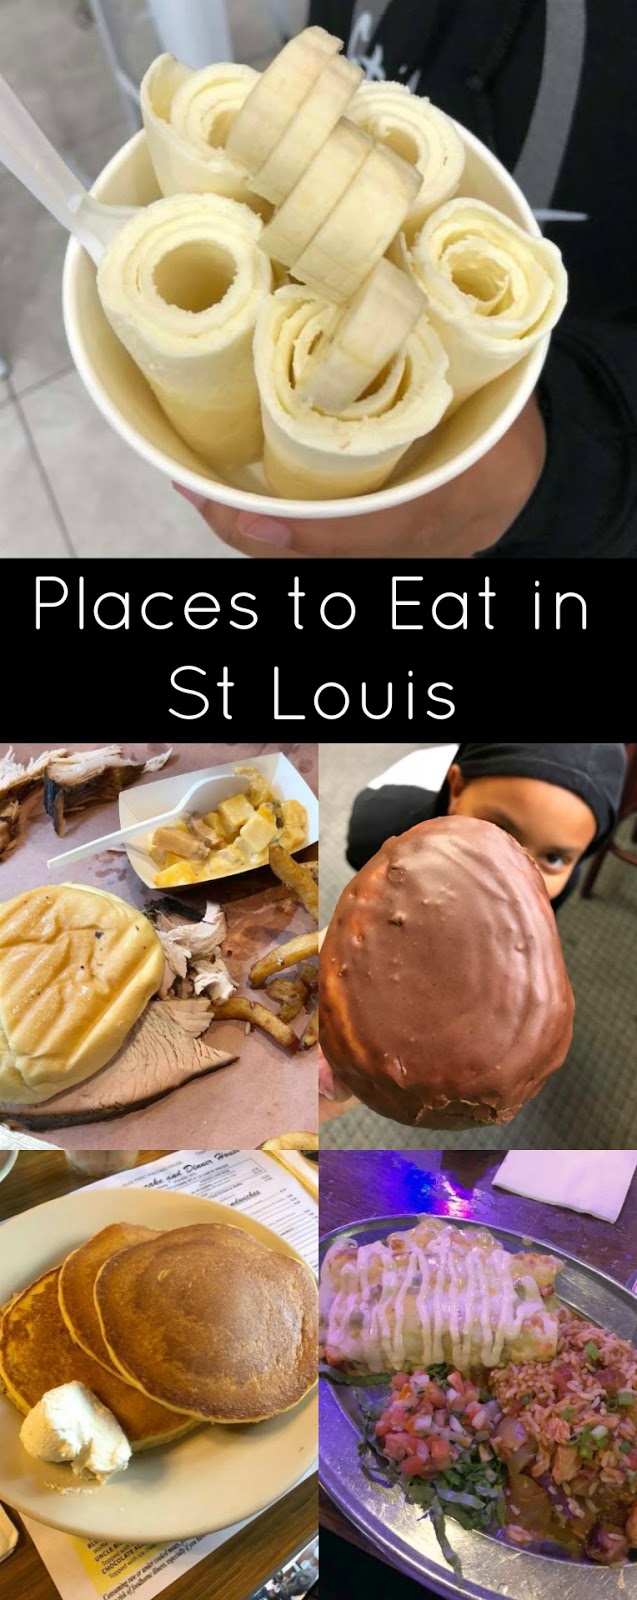 5 Must Try Places to Eat in St Louis, Missouri from Hot Eats and Cool Reads! Traveling to St Louis? Give these places a try! A few restaurants, a bakery and even ice cream!